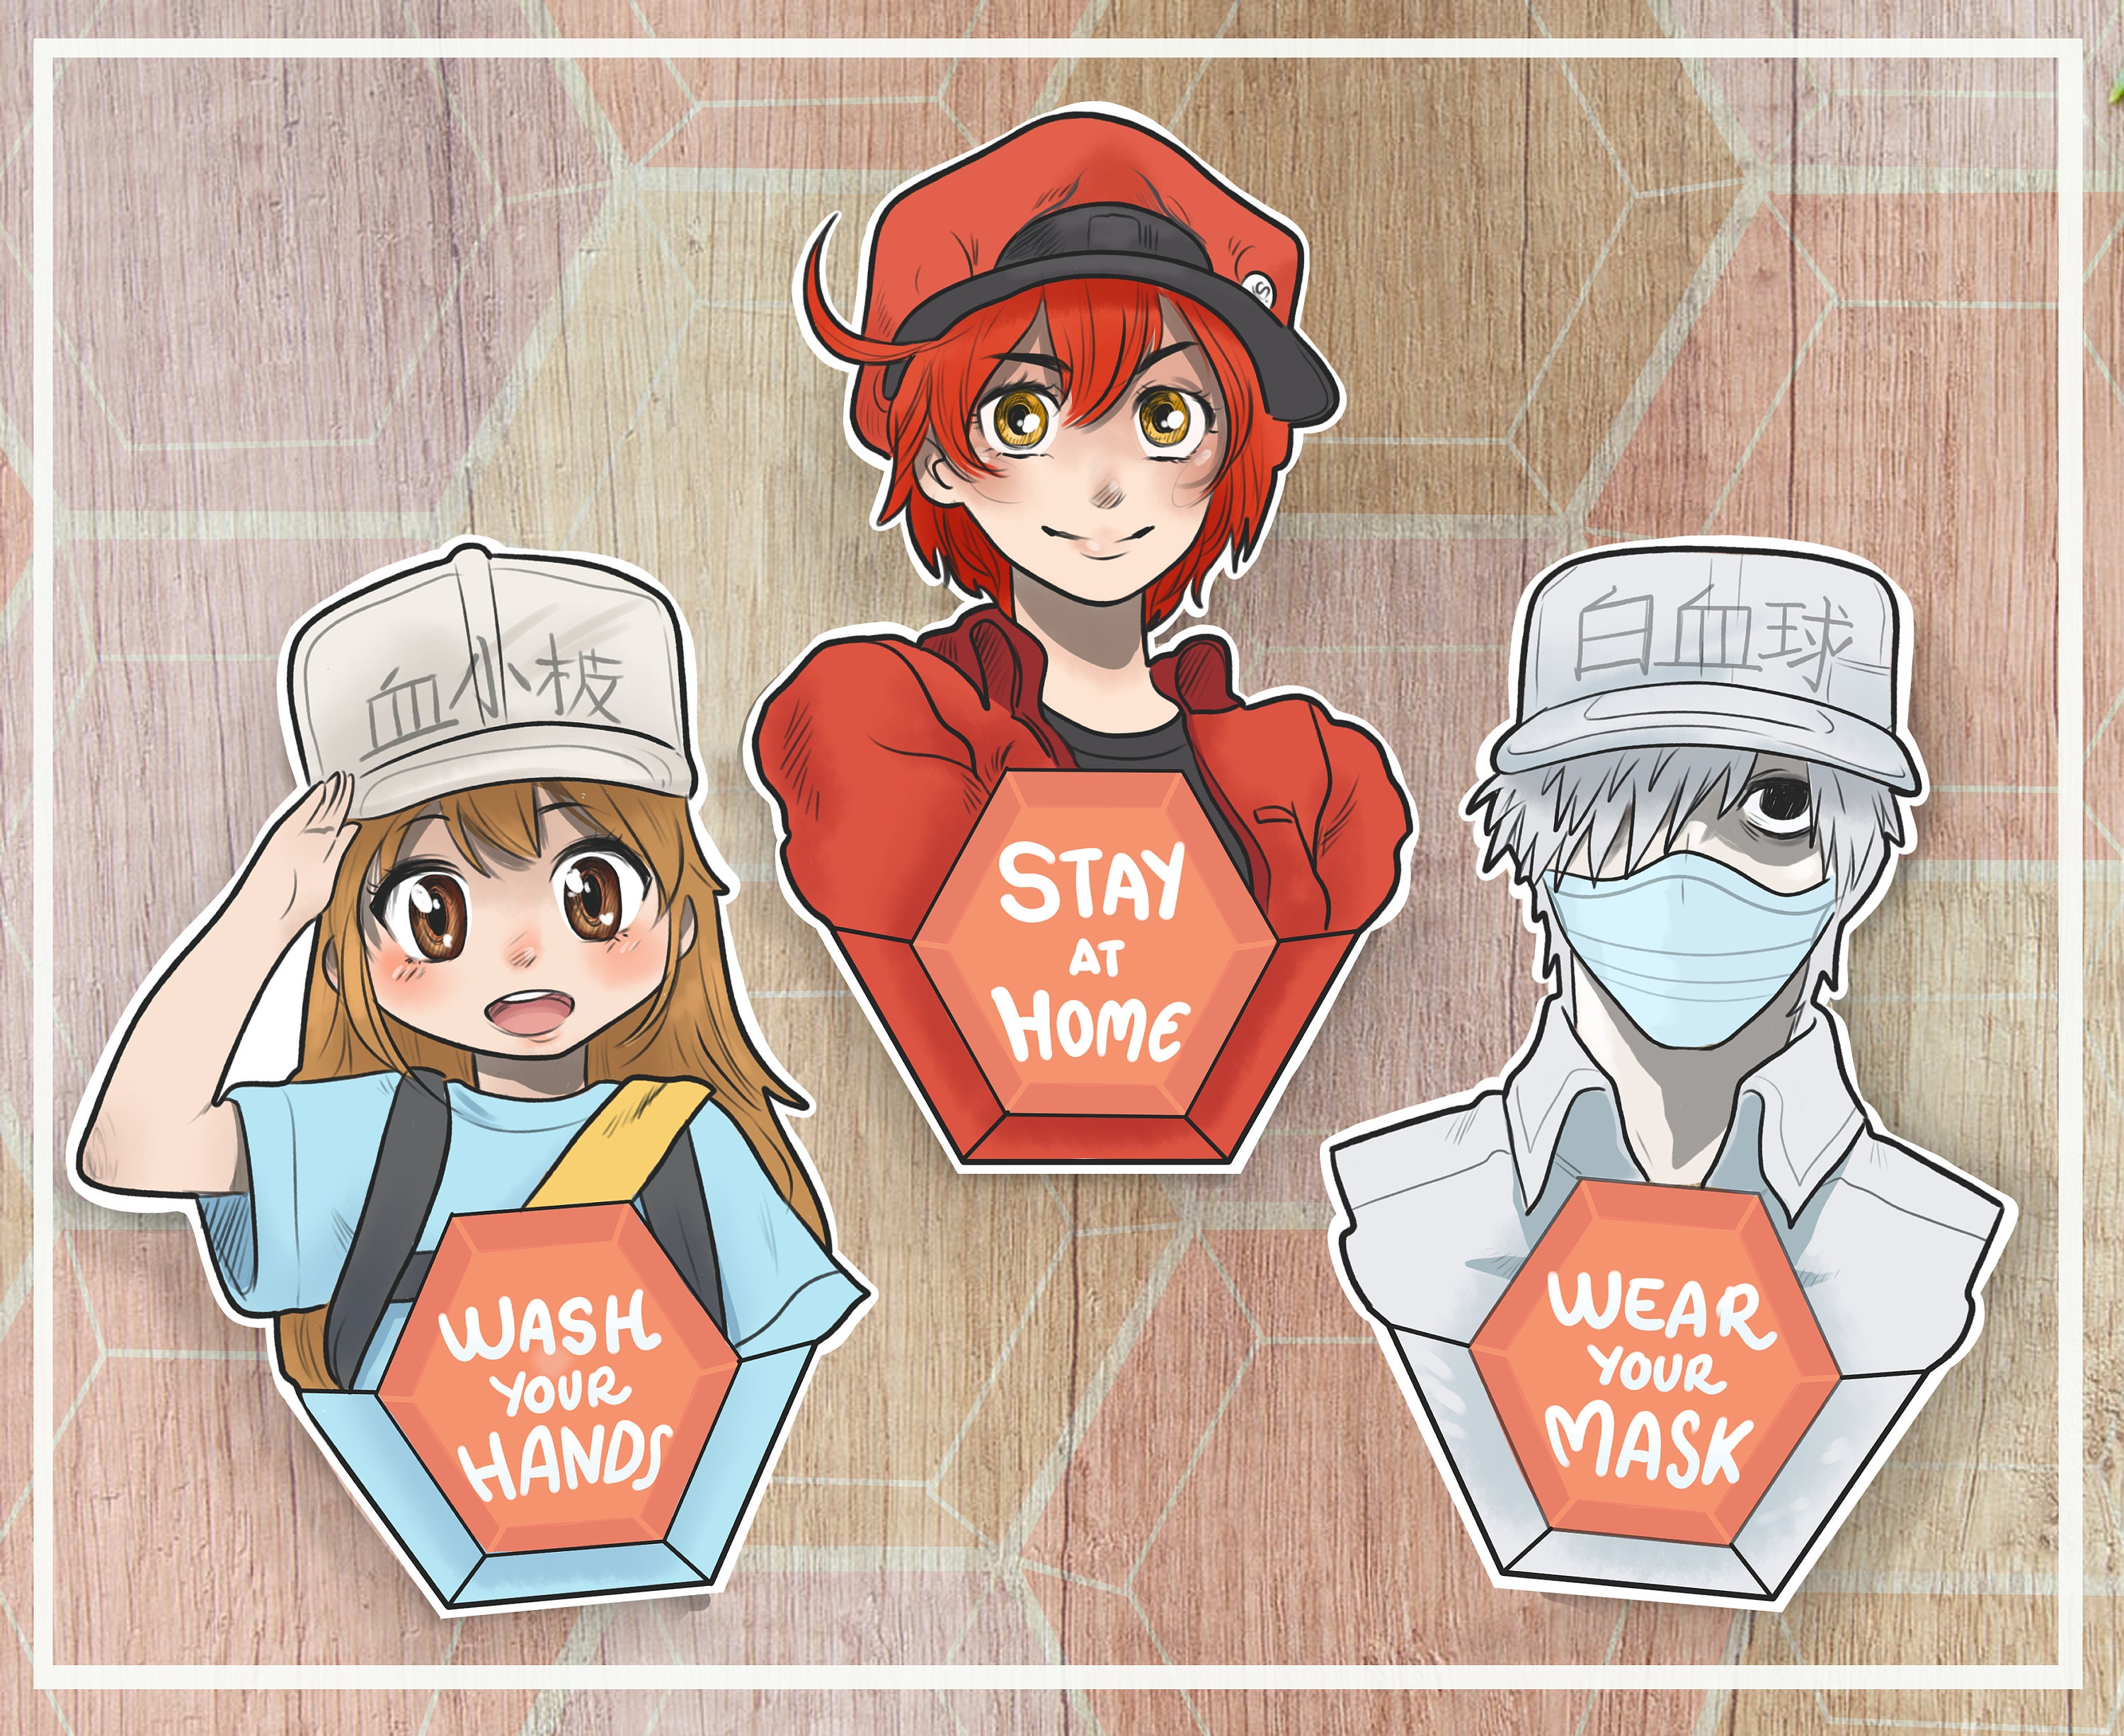 Cells at Work- White Blood Cell | Postcard